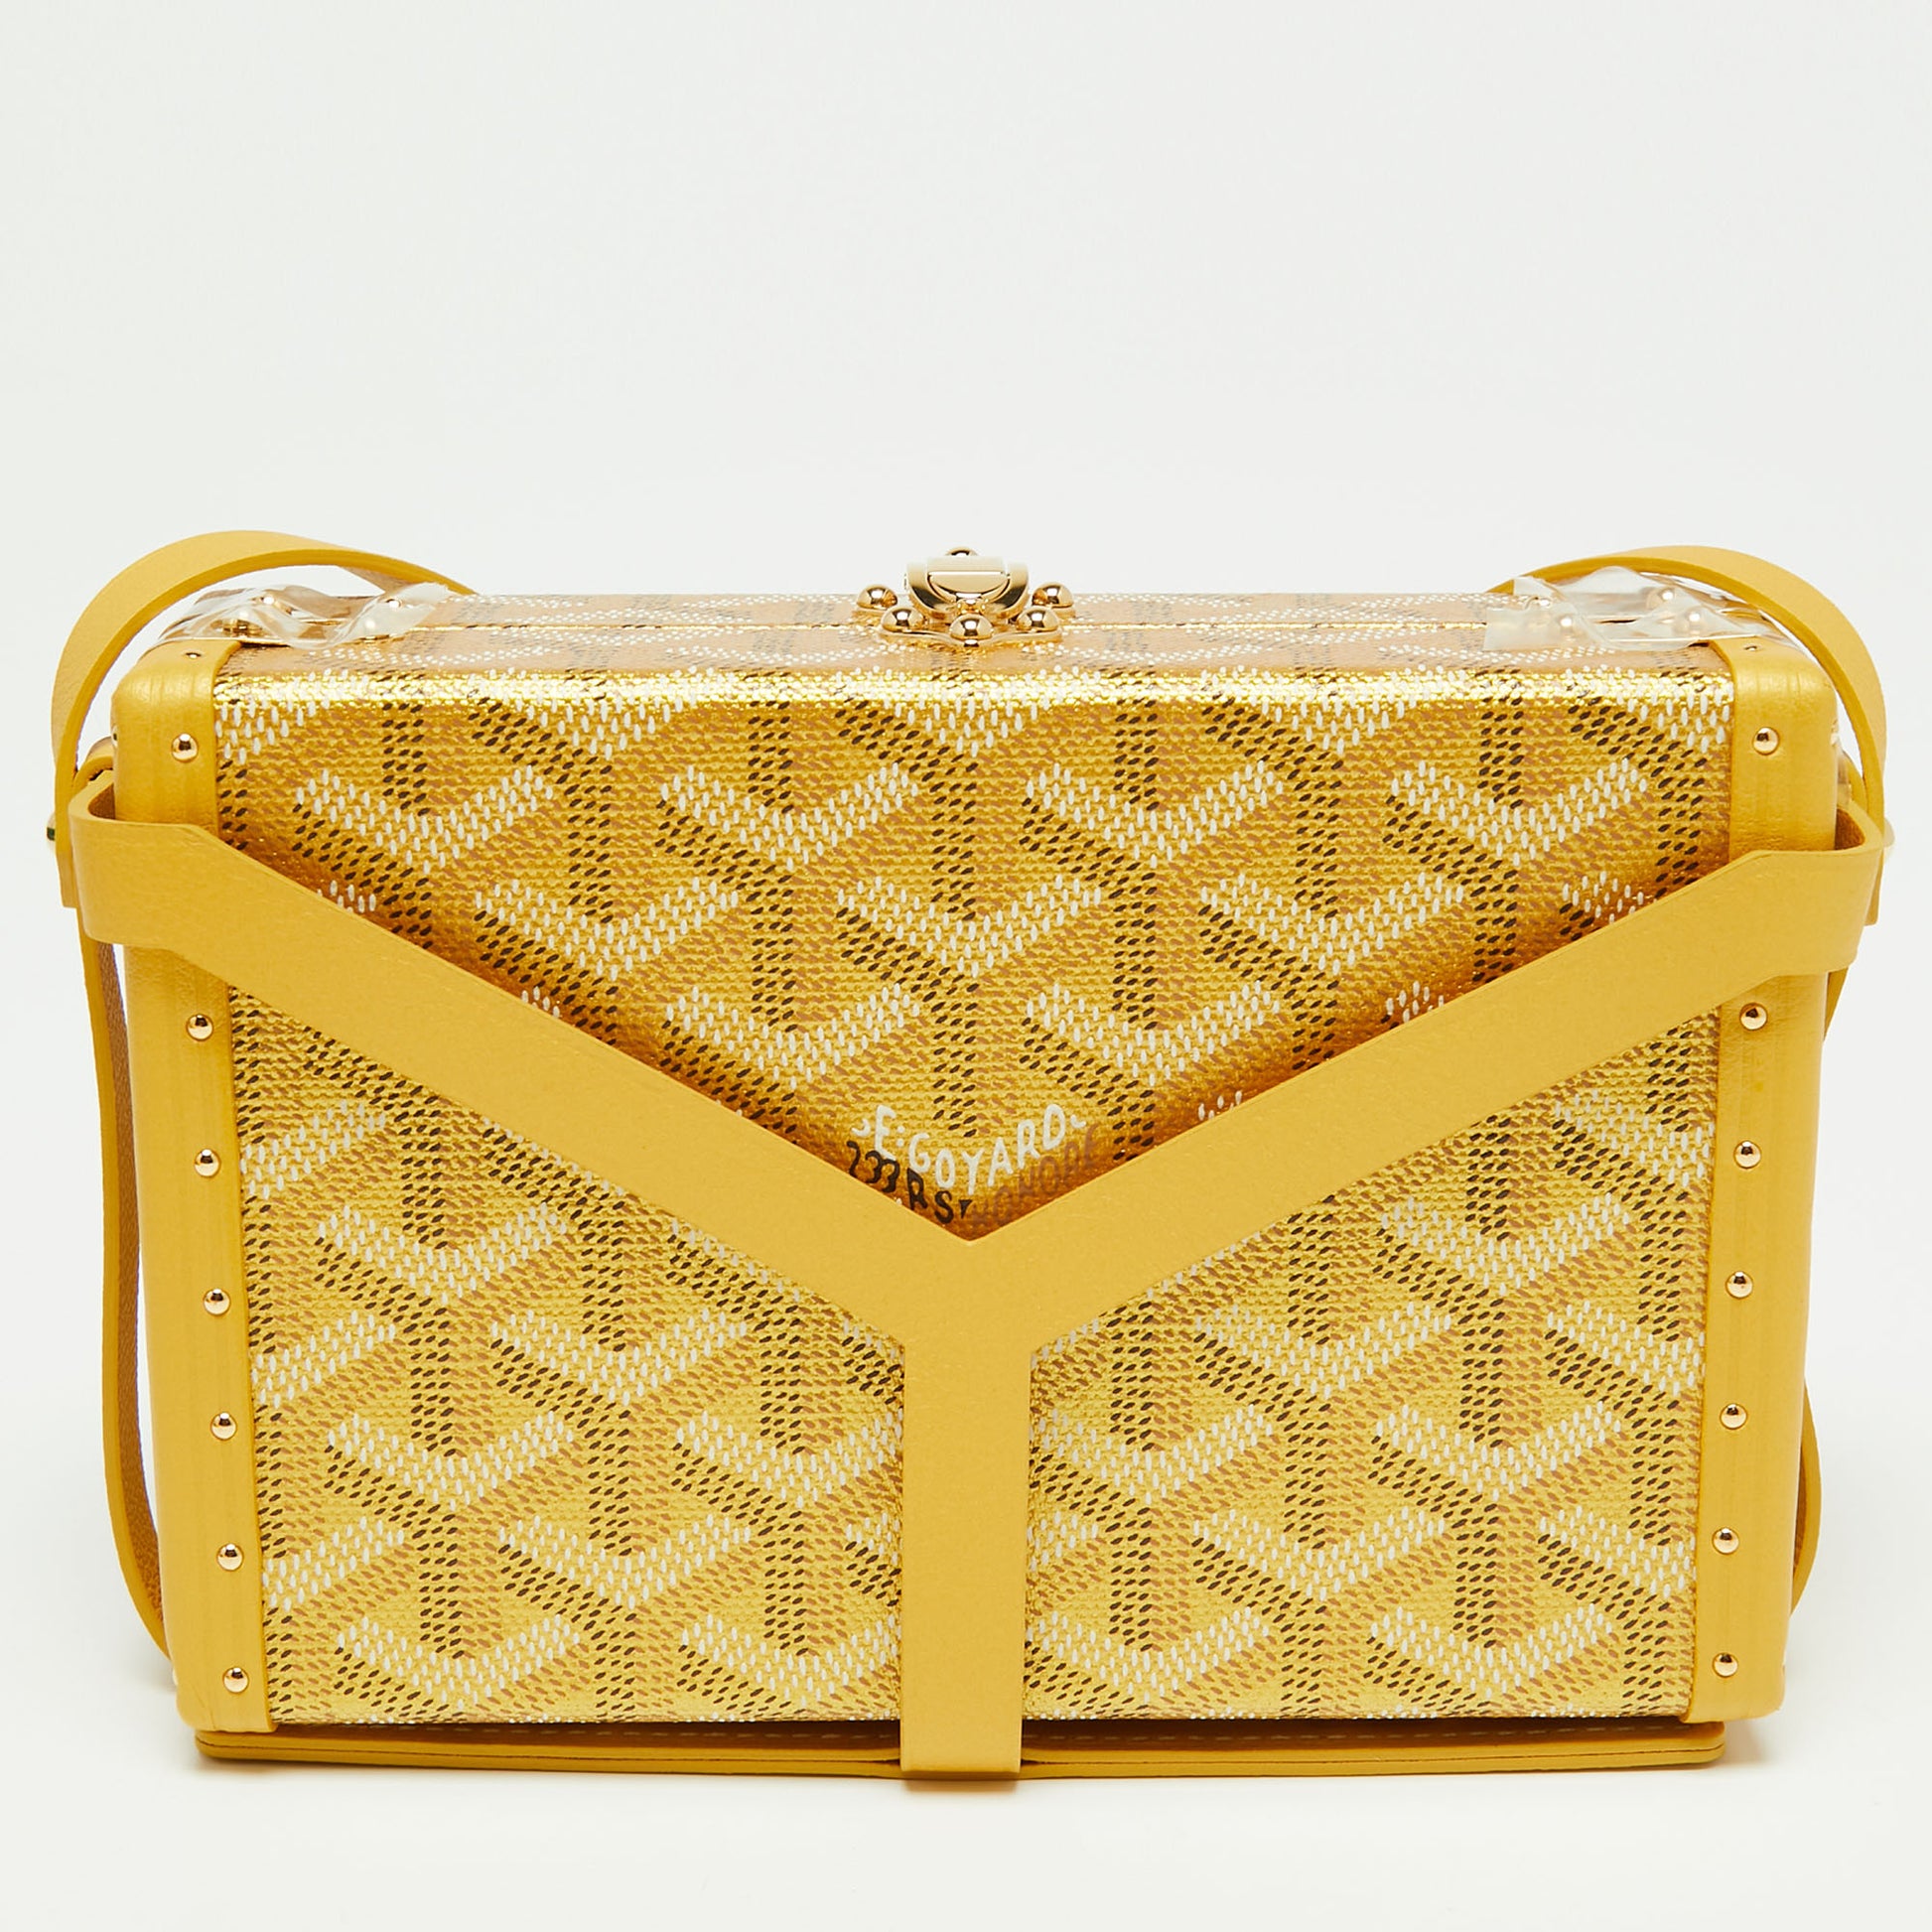 Goyard Yellow/Gold Coated Canvas and Leather Minaudiere Trunk Bag